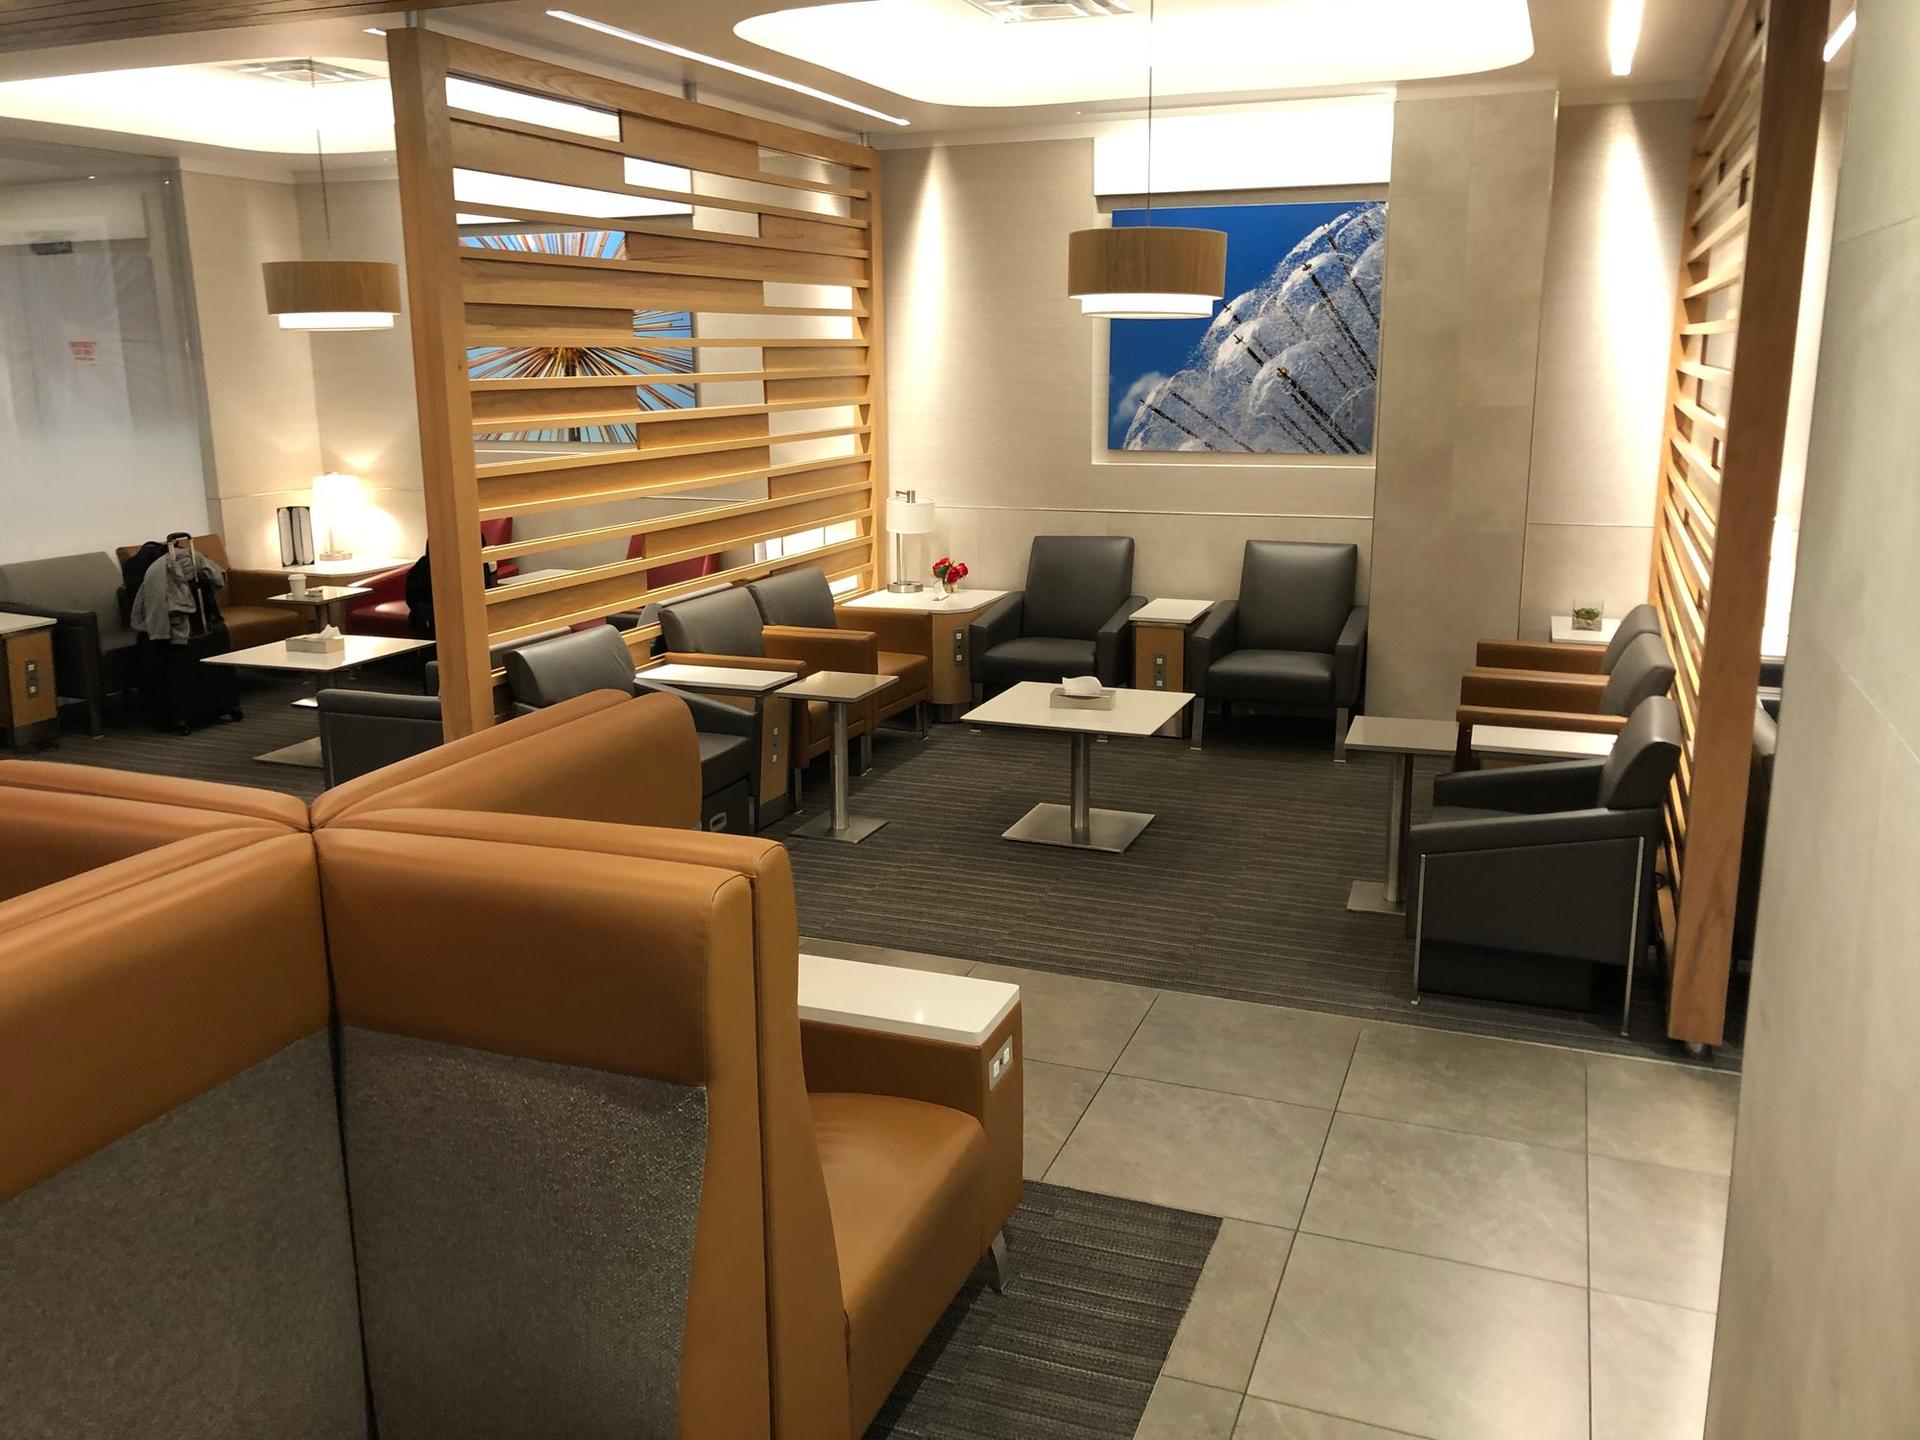 American Airlines Admirals Club image 4 of 13